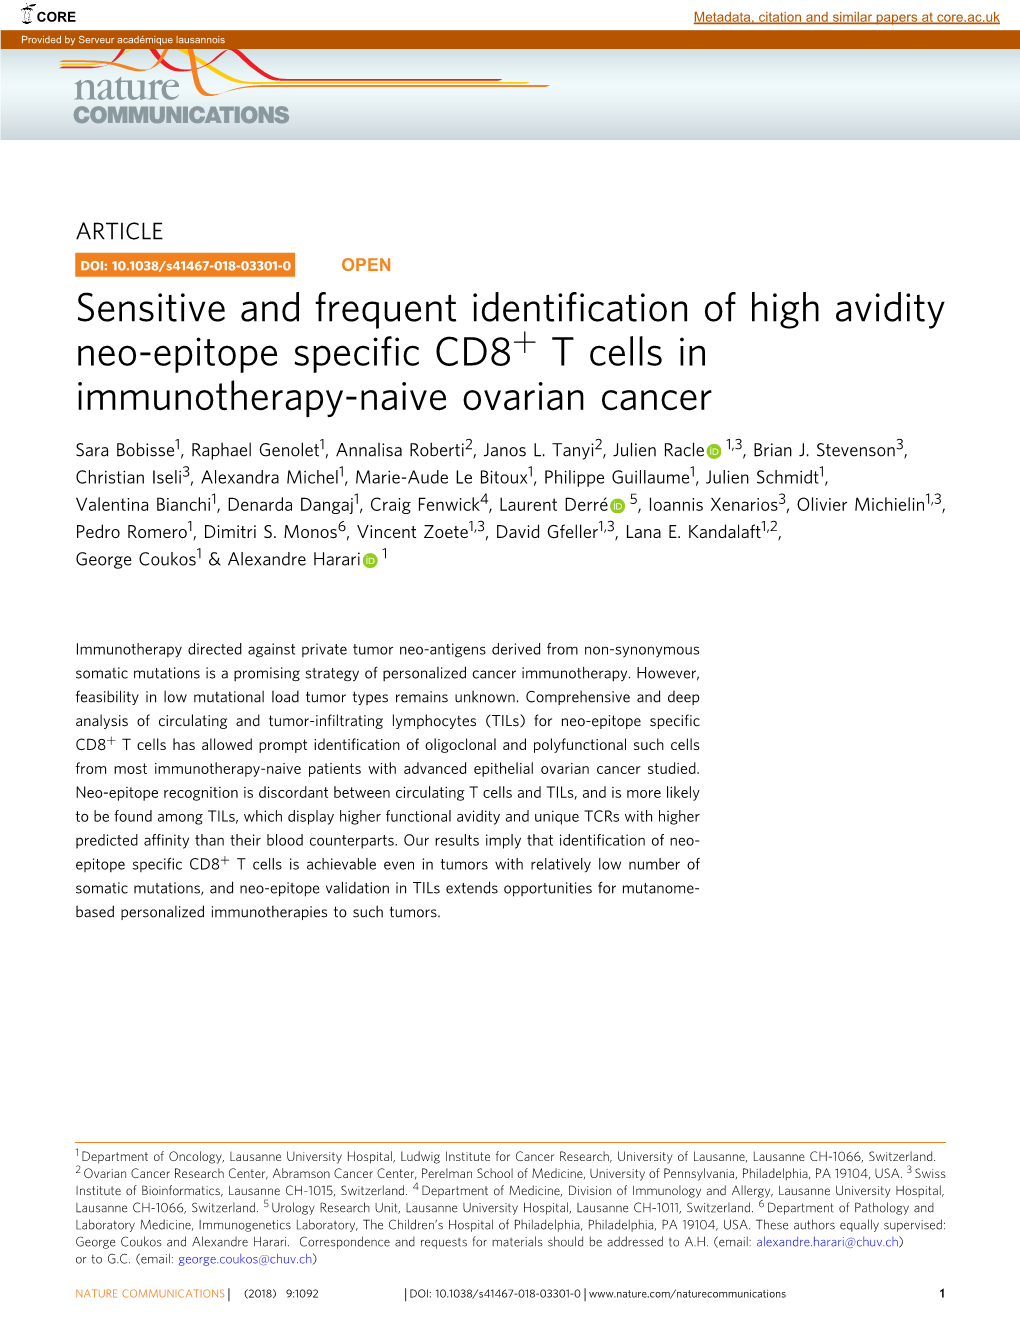 Sensitive and Frequent Identification of High Avidity Neo-Epitope Specific CD8+ T Cells in Immunotherapy-Naive Ovarian Cancer